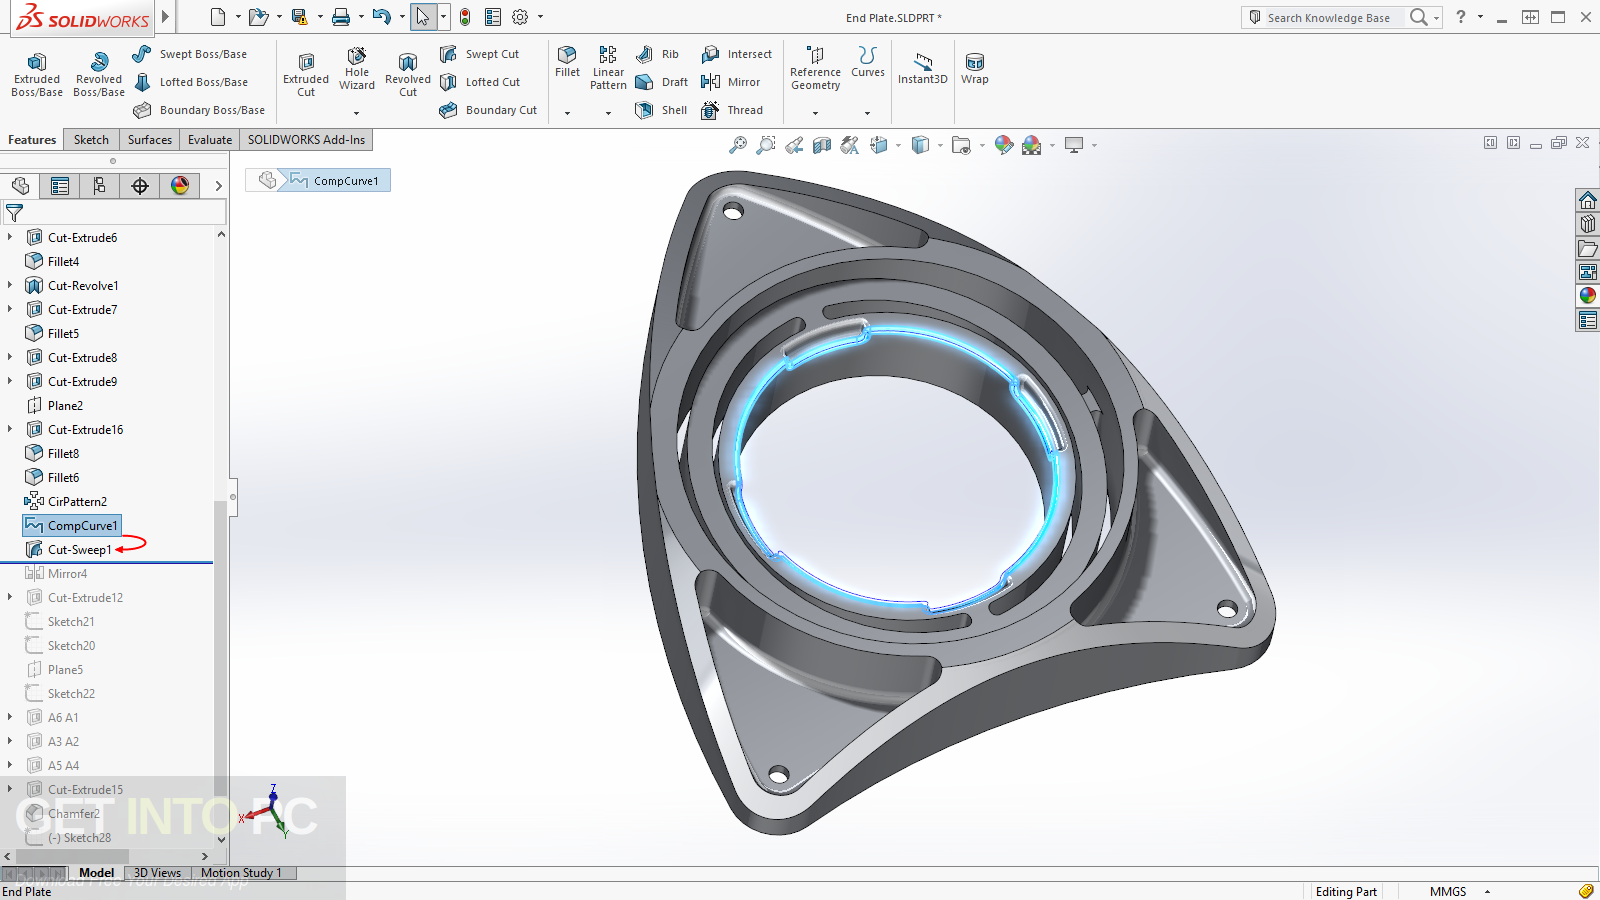 solidworks 2009 free download